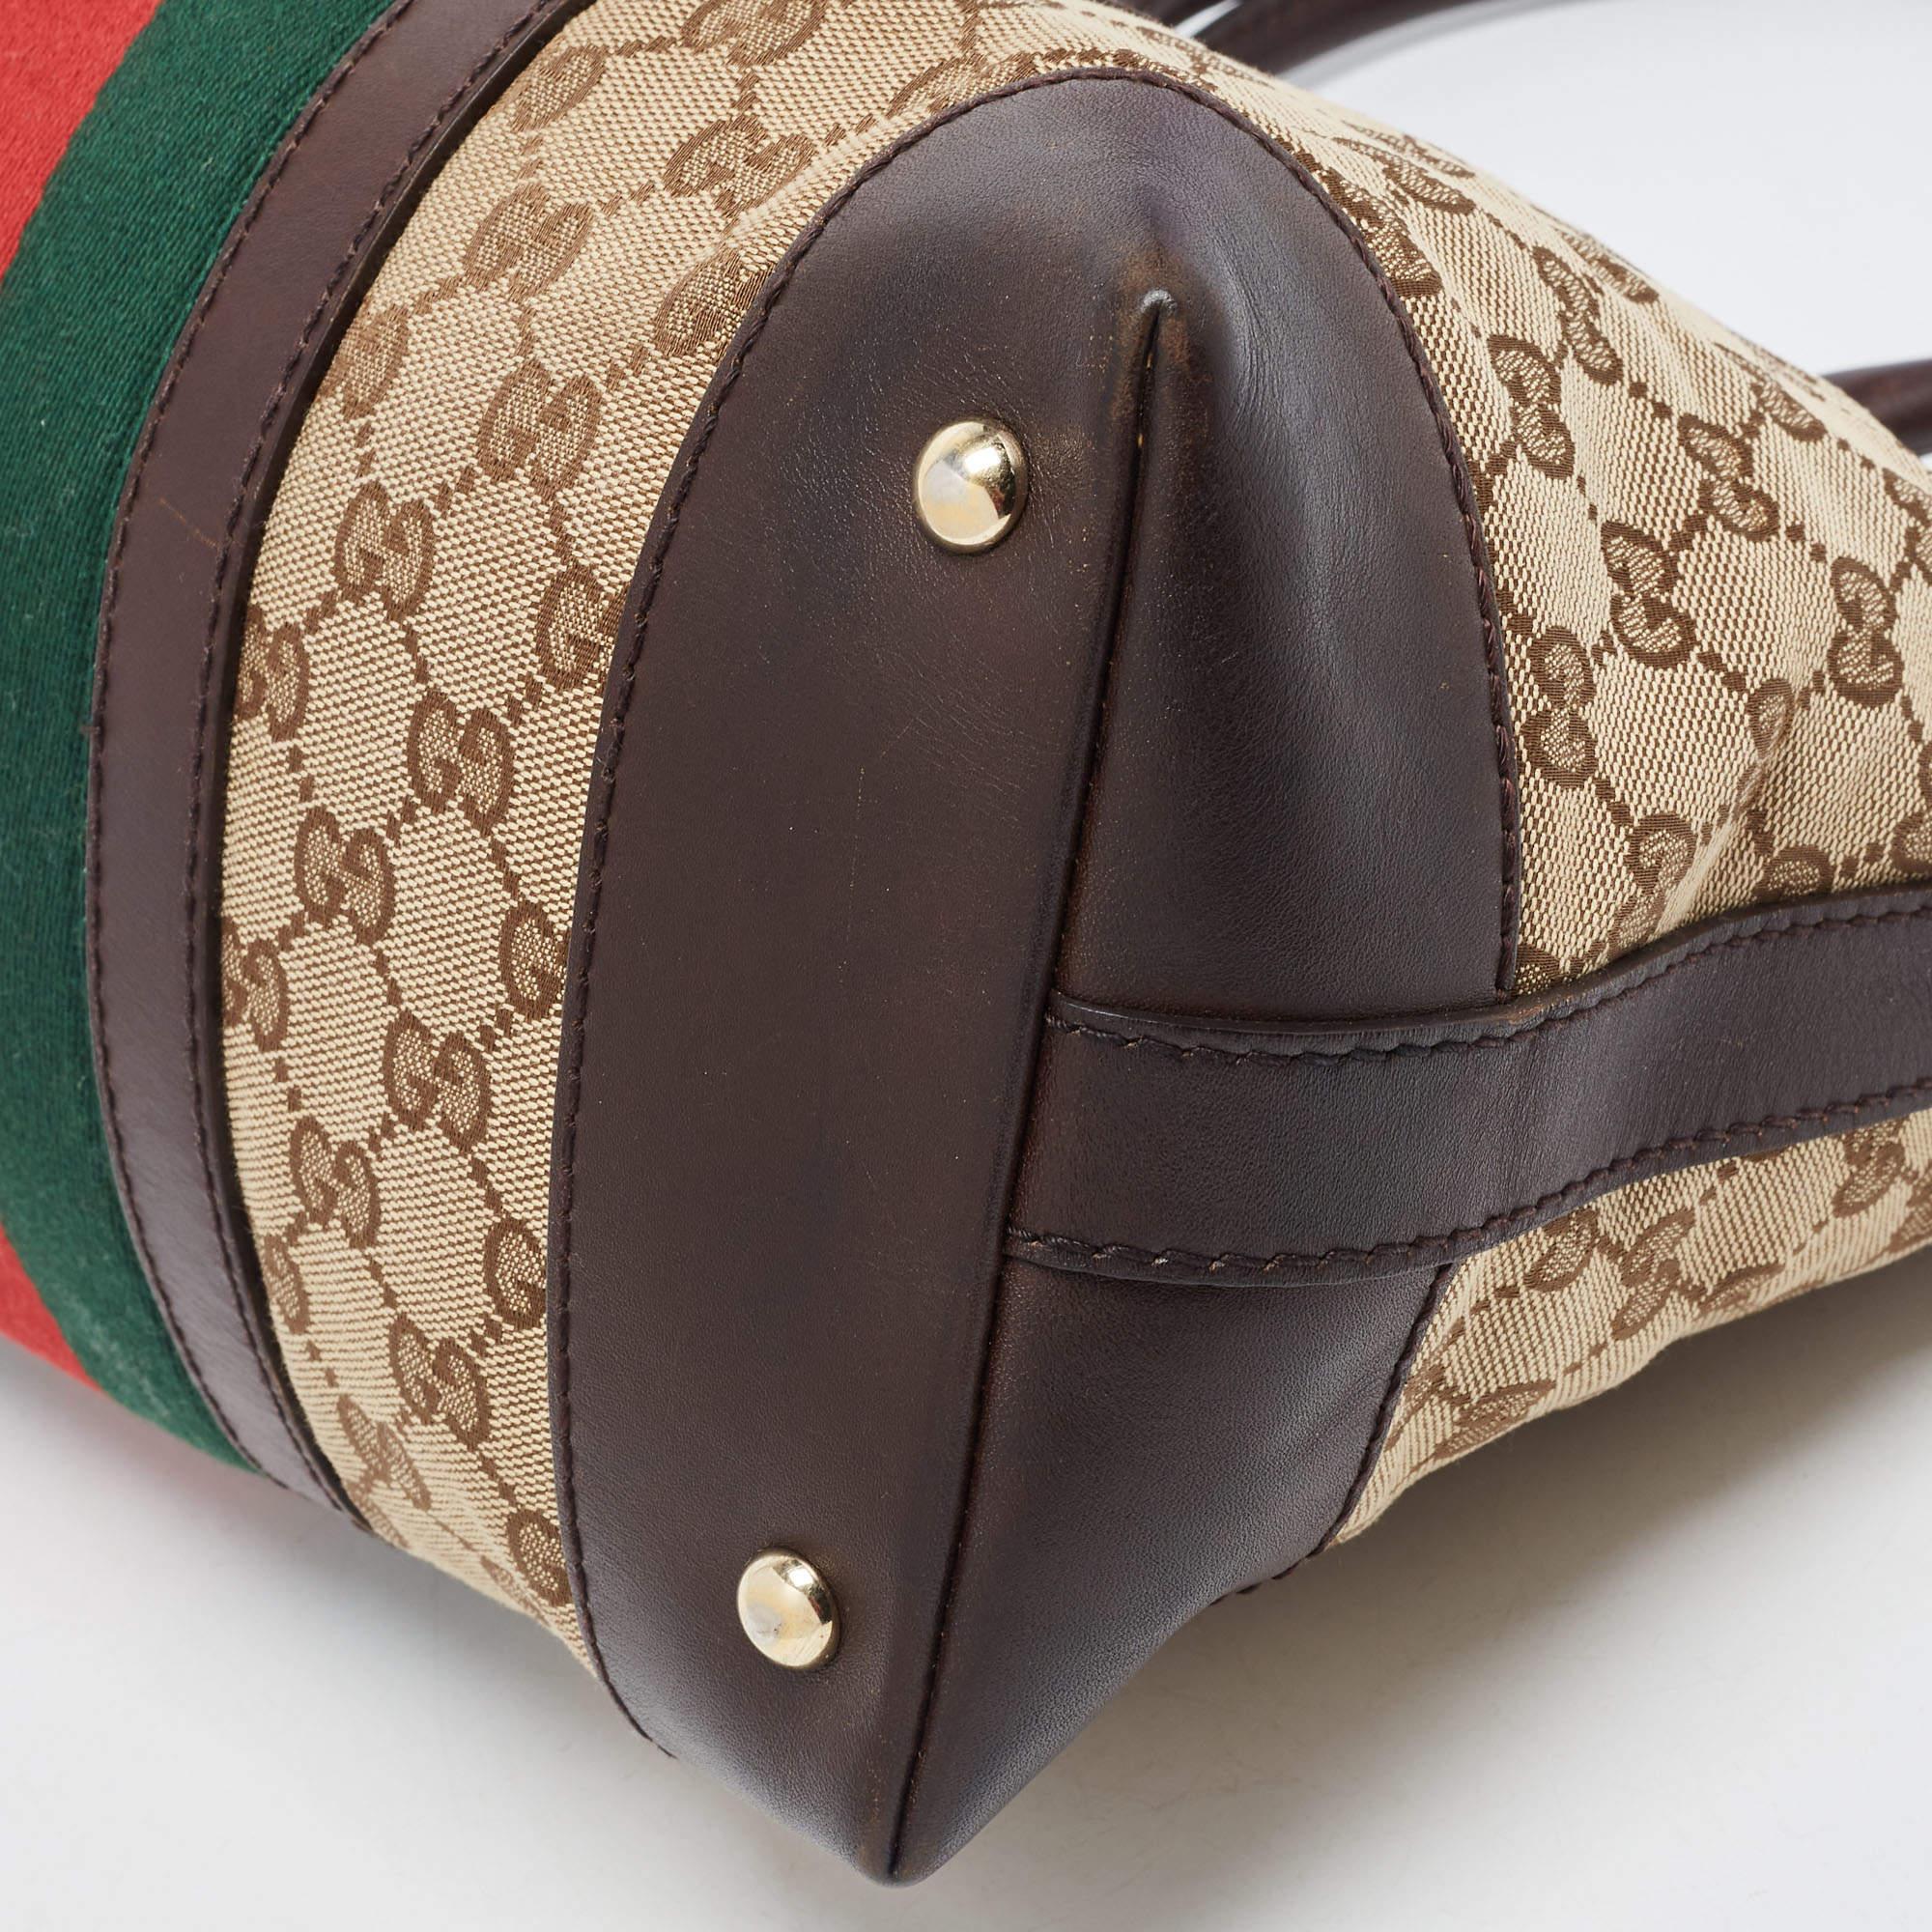 Gucci Brown/Beige GG Canvas and Leather Web Zip Bag For Sale 3